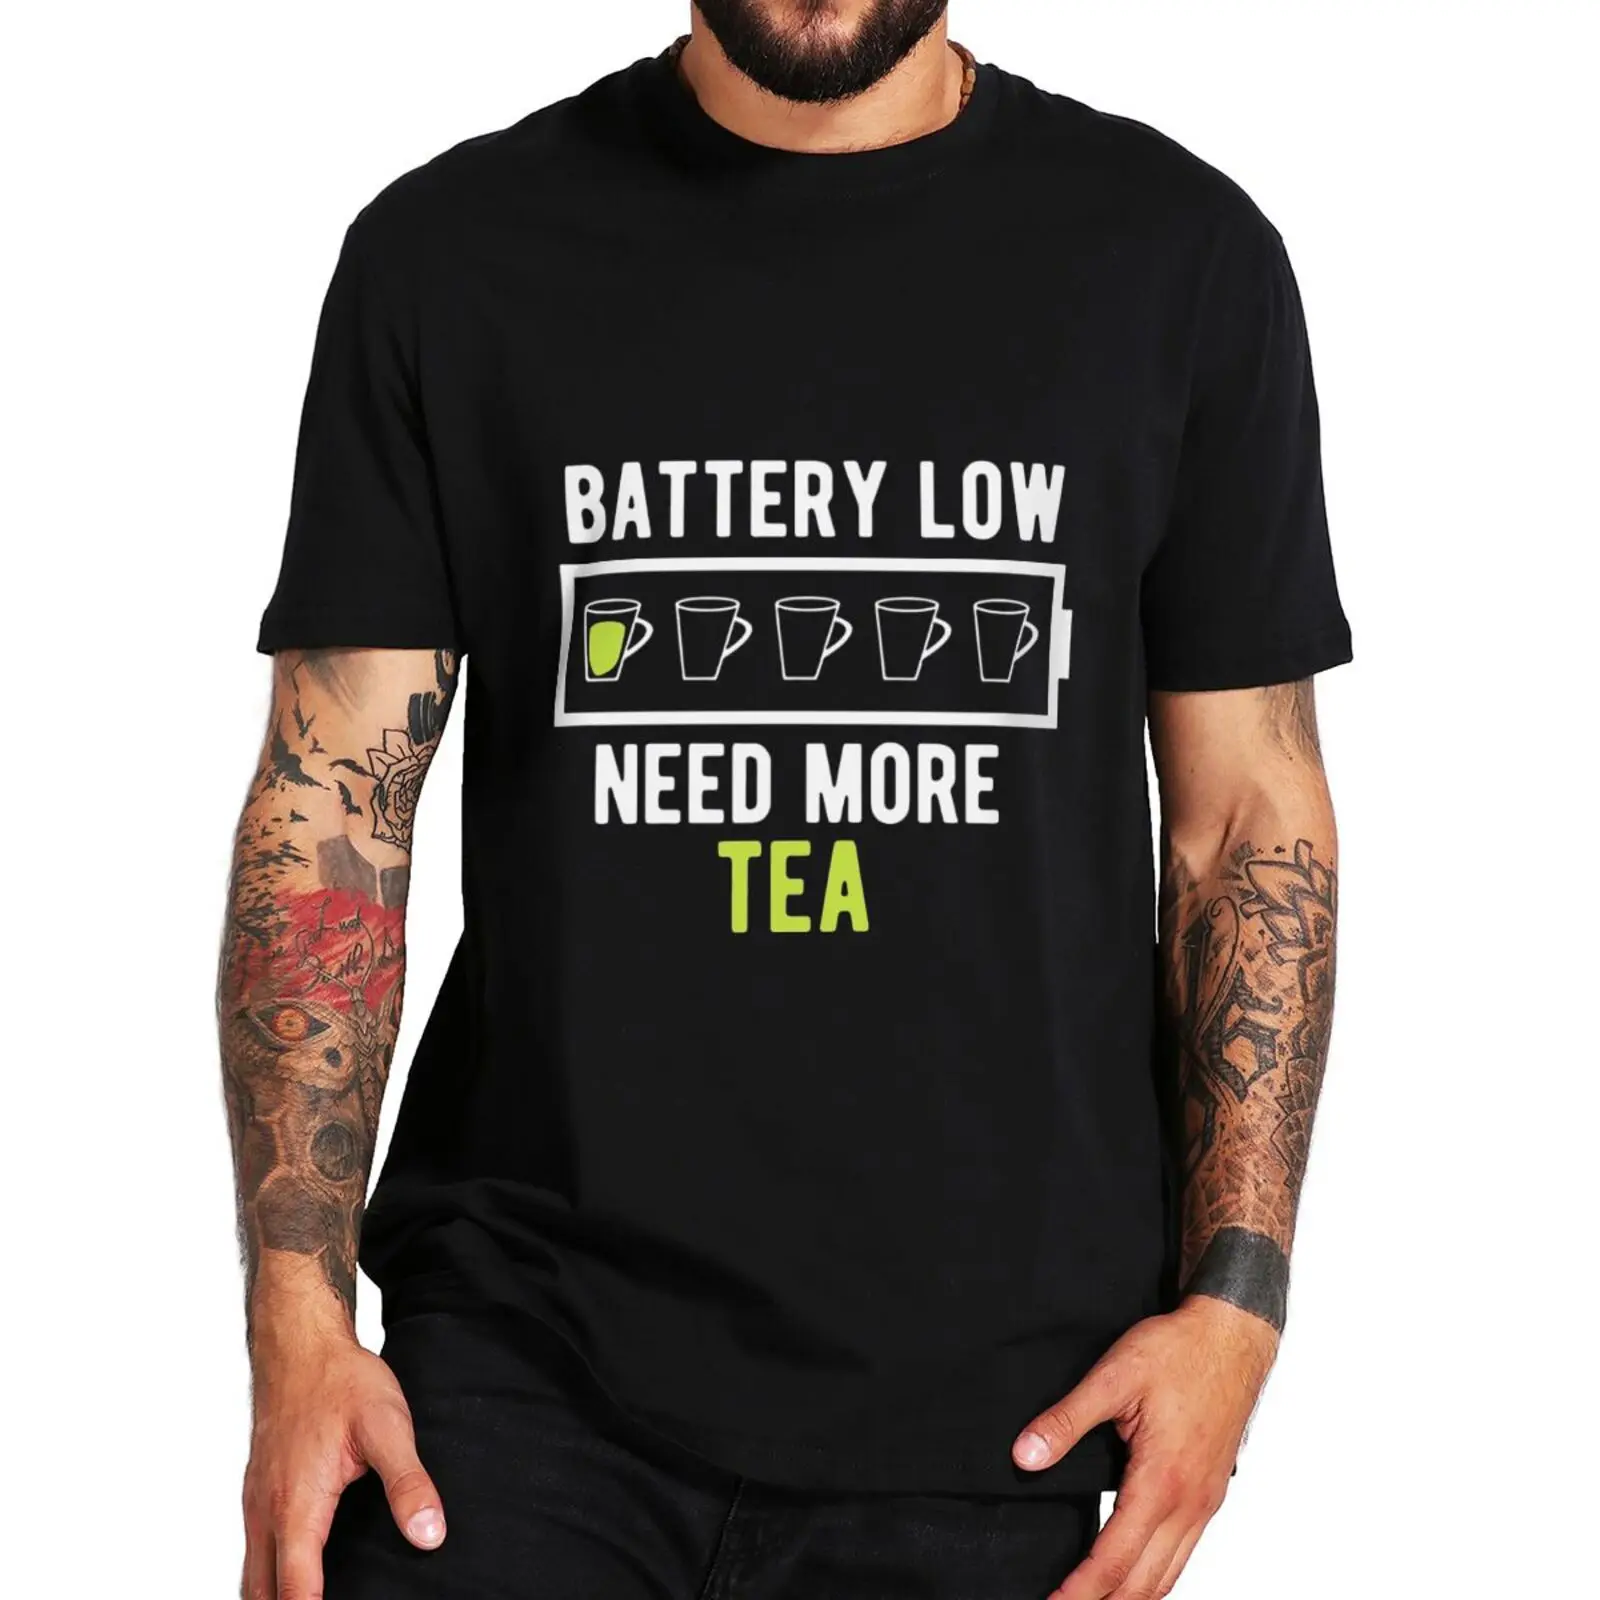 

Funny Low Battery Need Tea T Shirt Humor Sayings Tea Lovers Short Sleeve Casual Cotton Unisex Oversized T-shirts